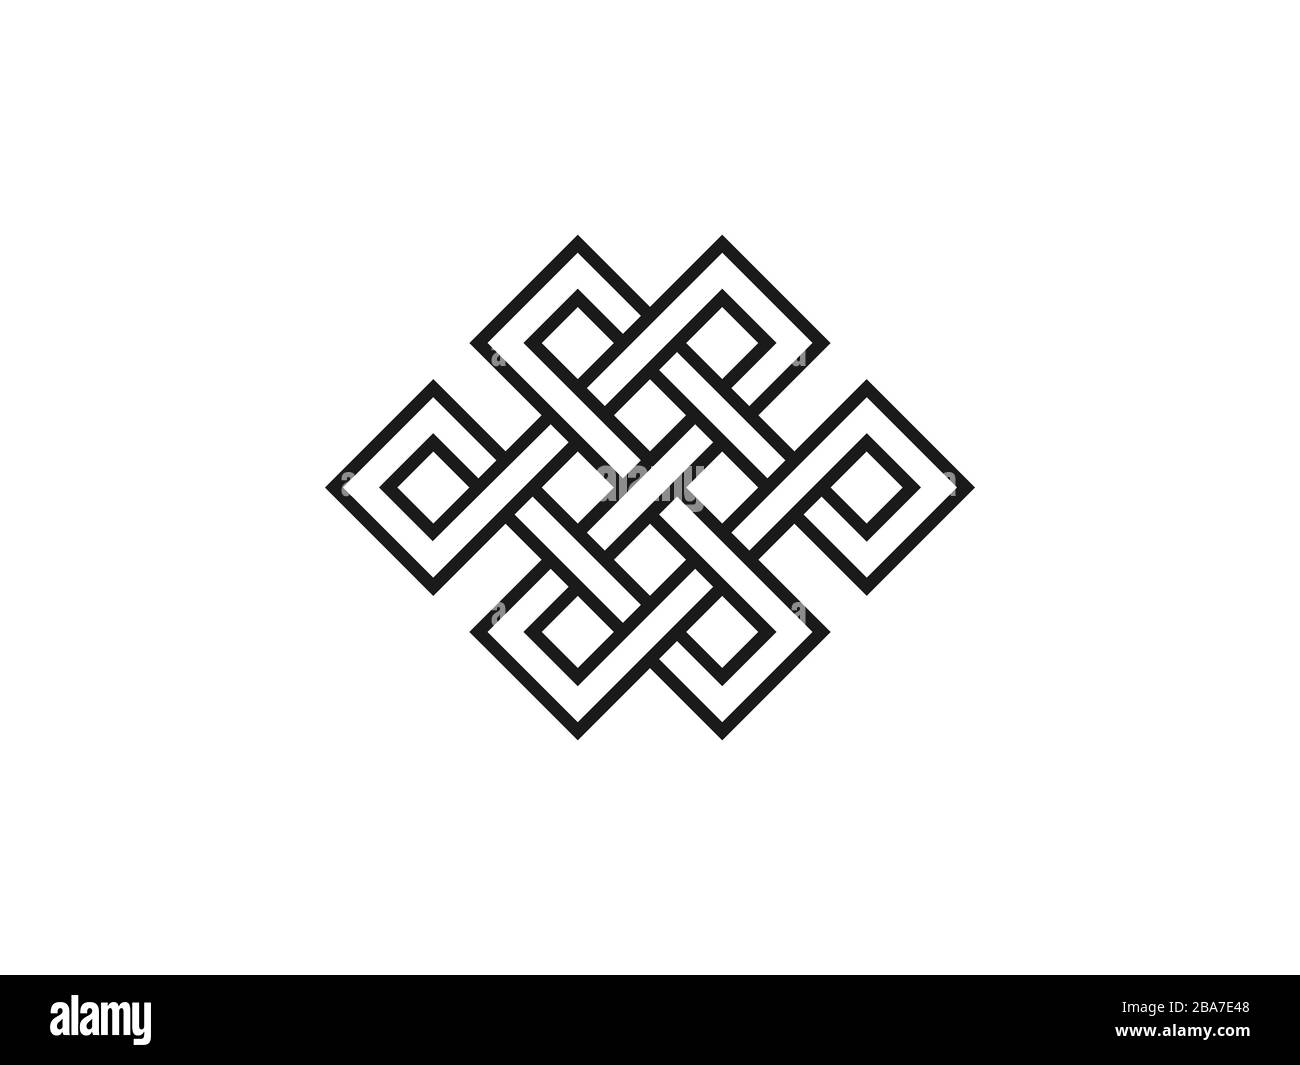 Endless knot, symbolism icon. Vector illustration, flat design. Stock Vector